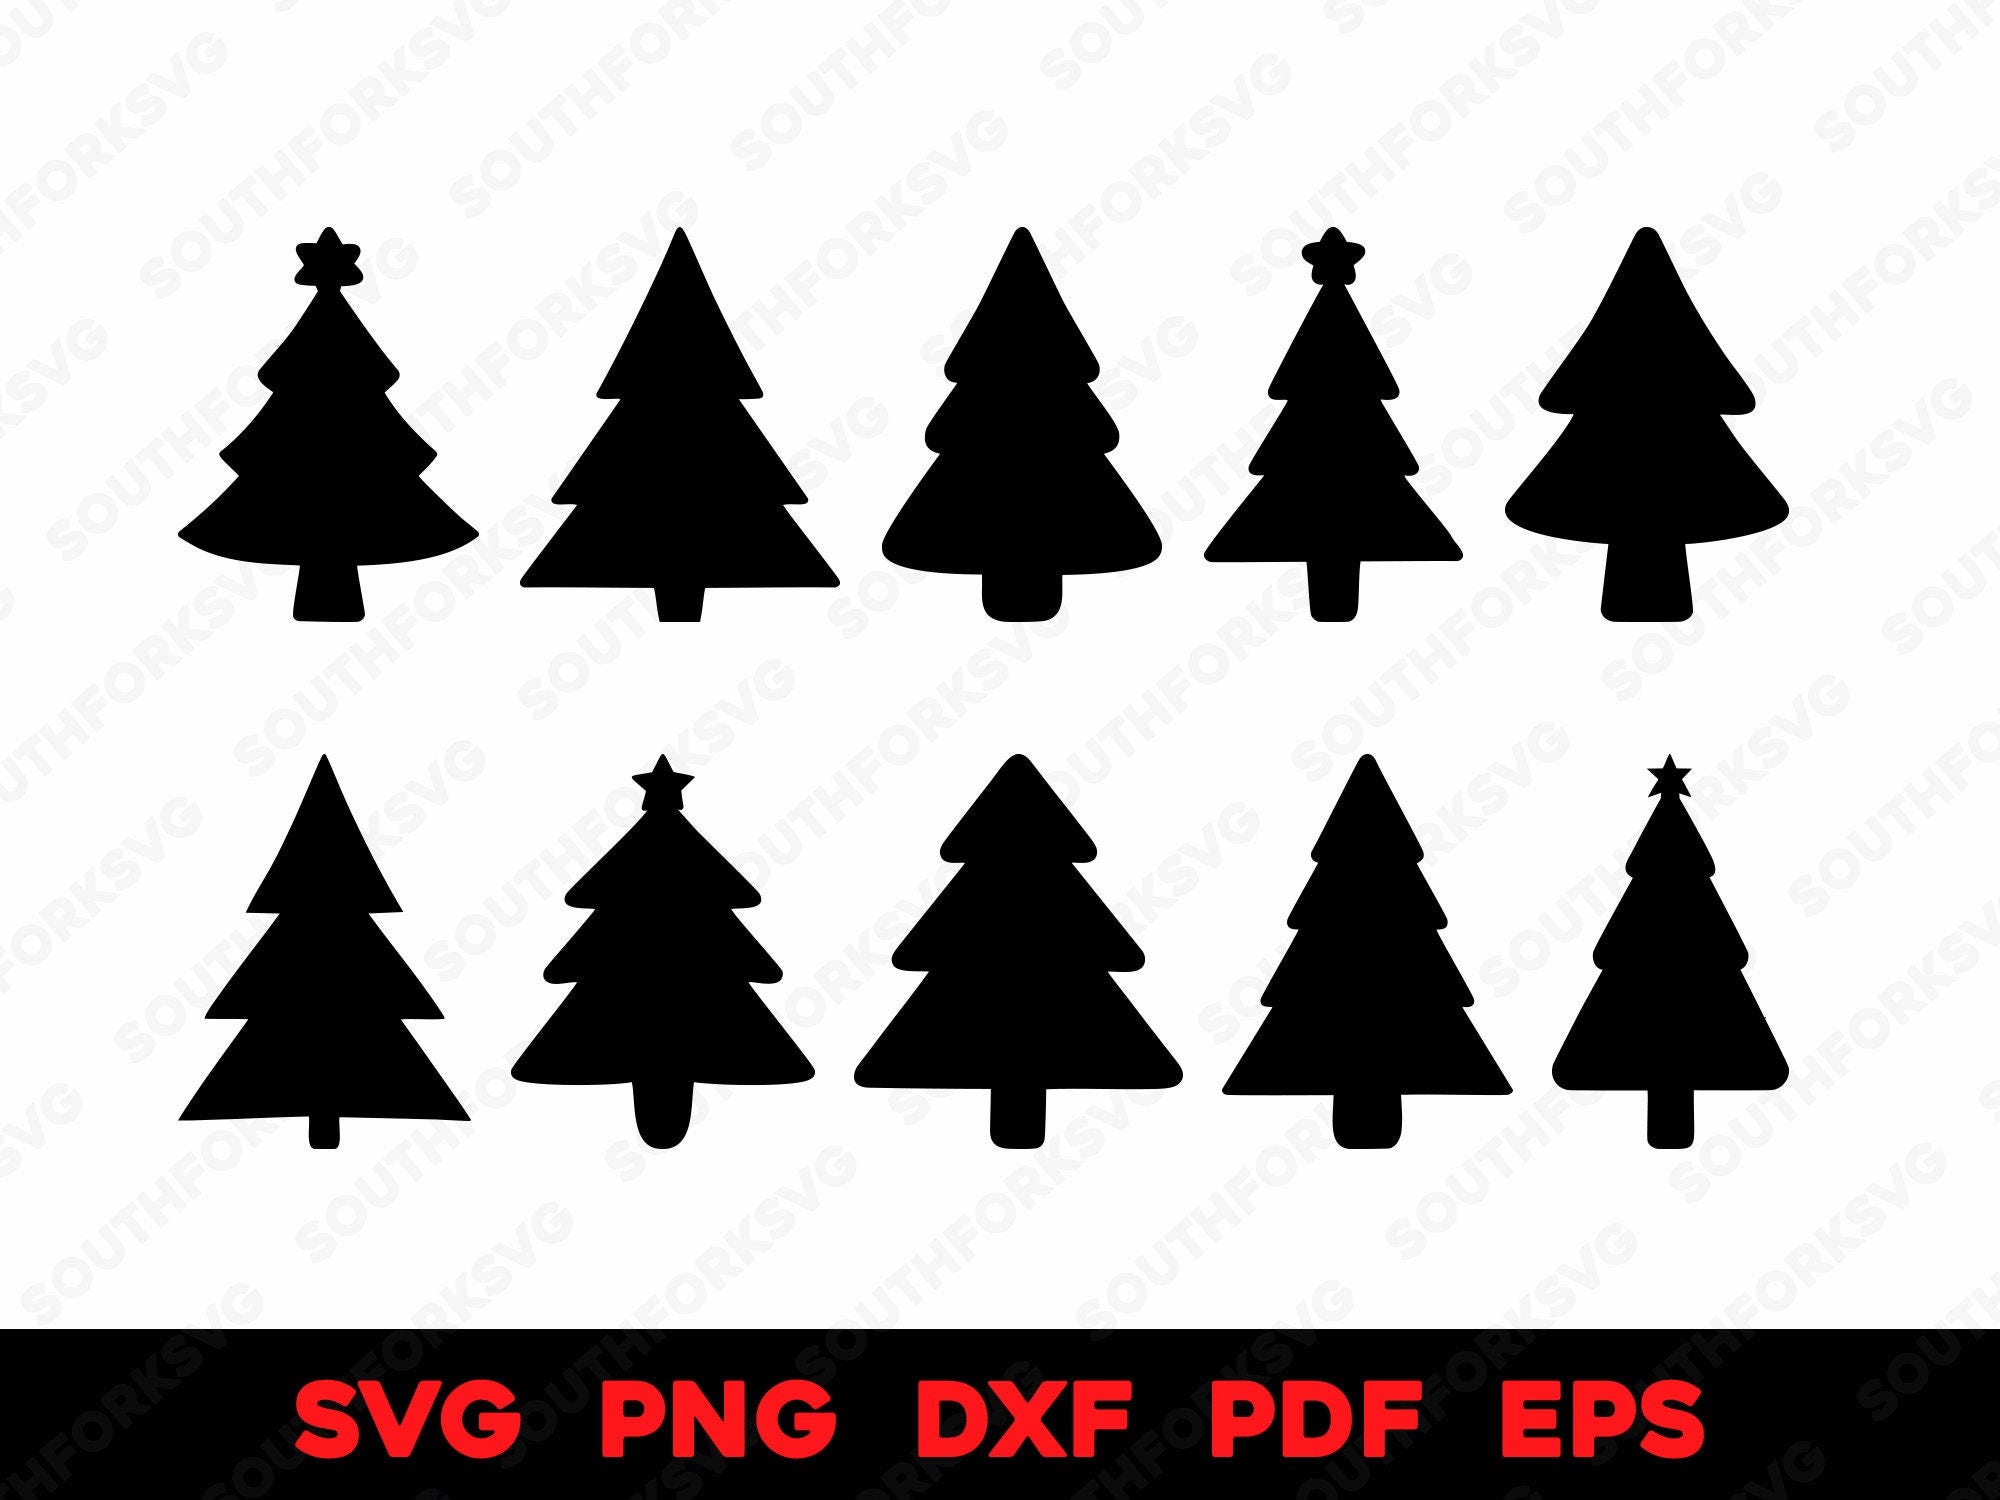 Christmas Xmas Tree Silhouettes Bundle 1 | svg png dxf eps pdf | vector graphic design cut print laser engrave files commercial use